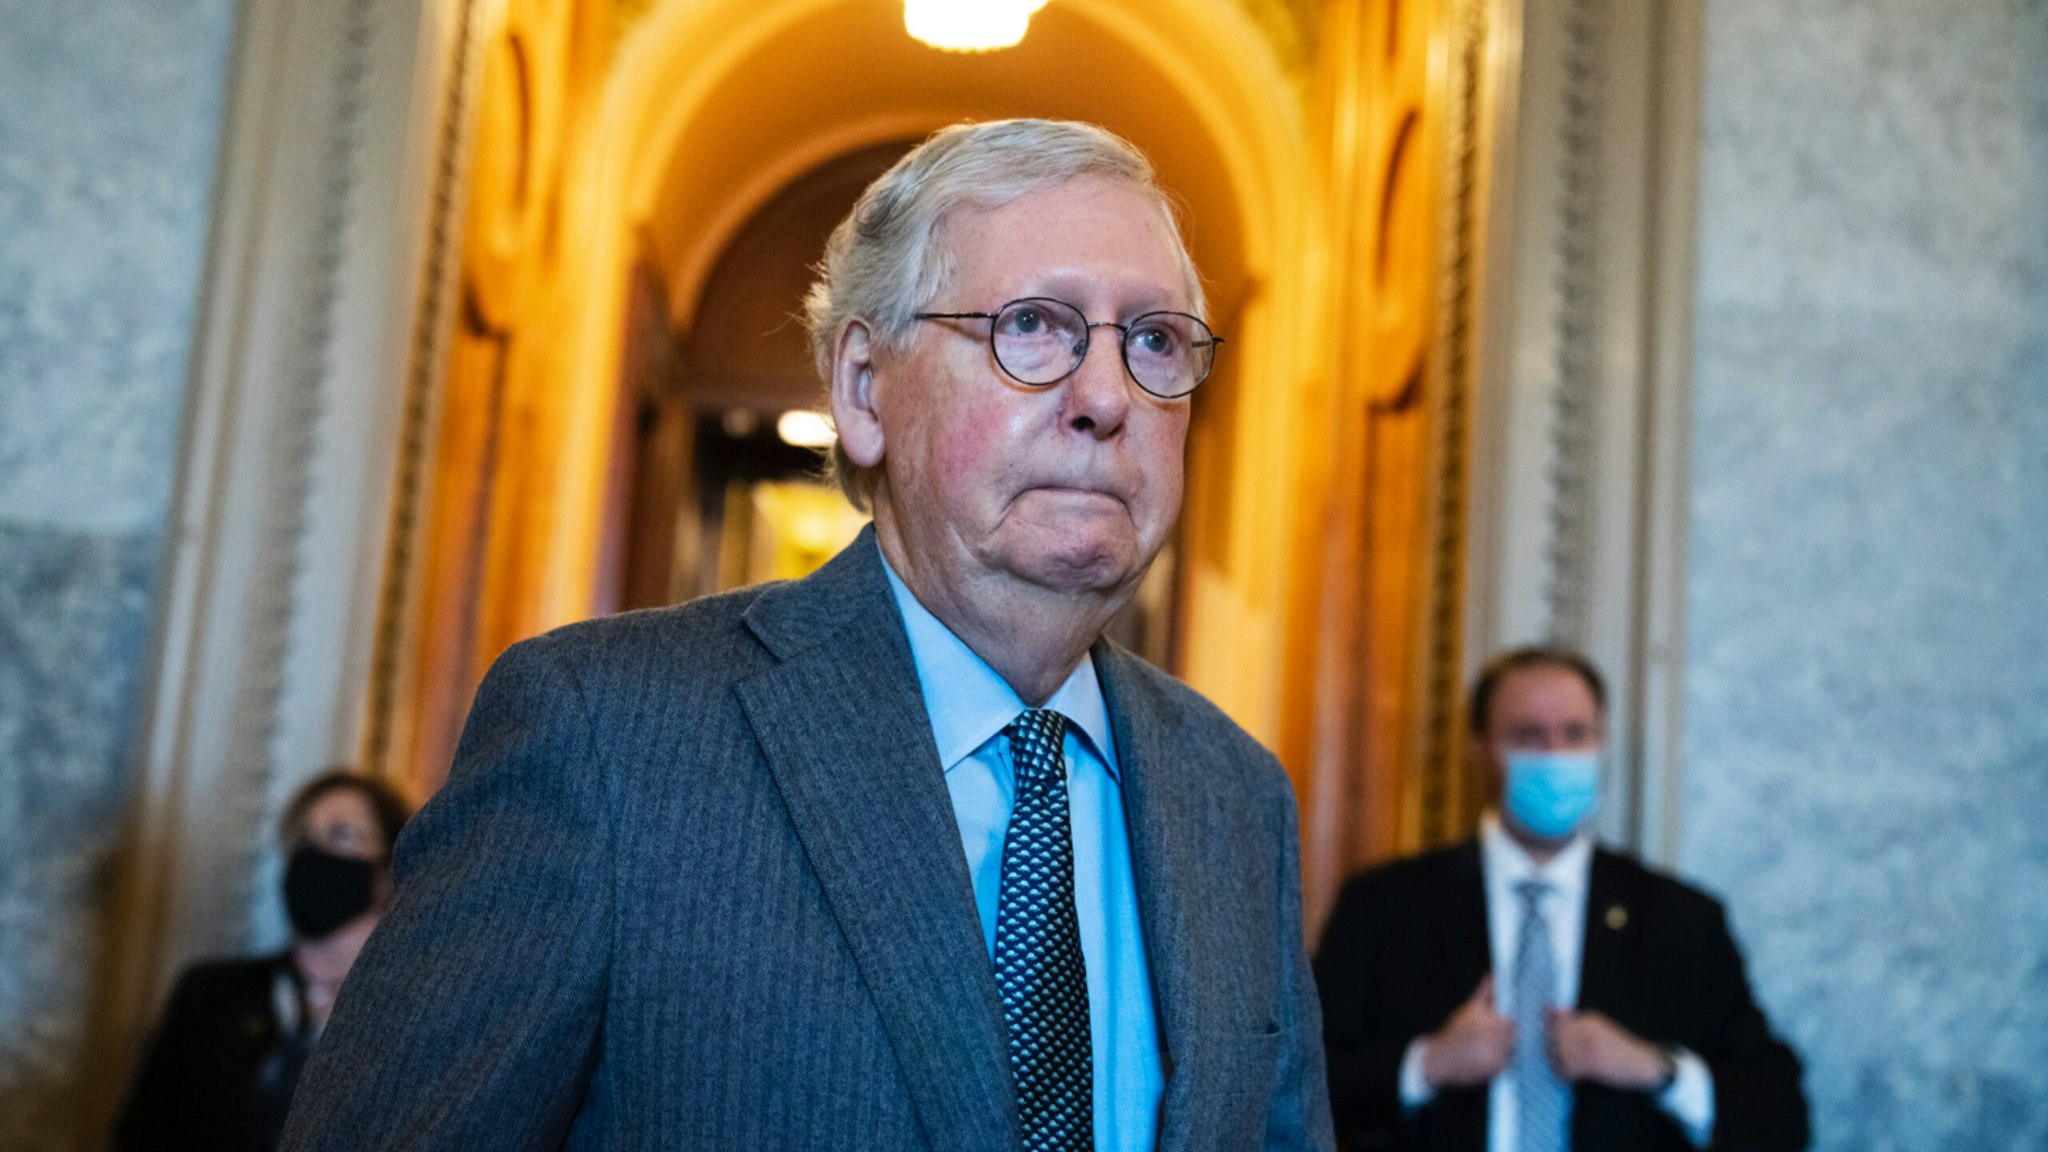 Senate Minority Leader Mitch McConnell, R-Ky., is seen in the U.S. Capitol during a senate vote on Tuesday, February 15, 2022.